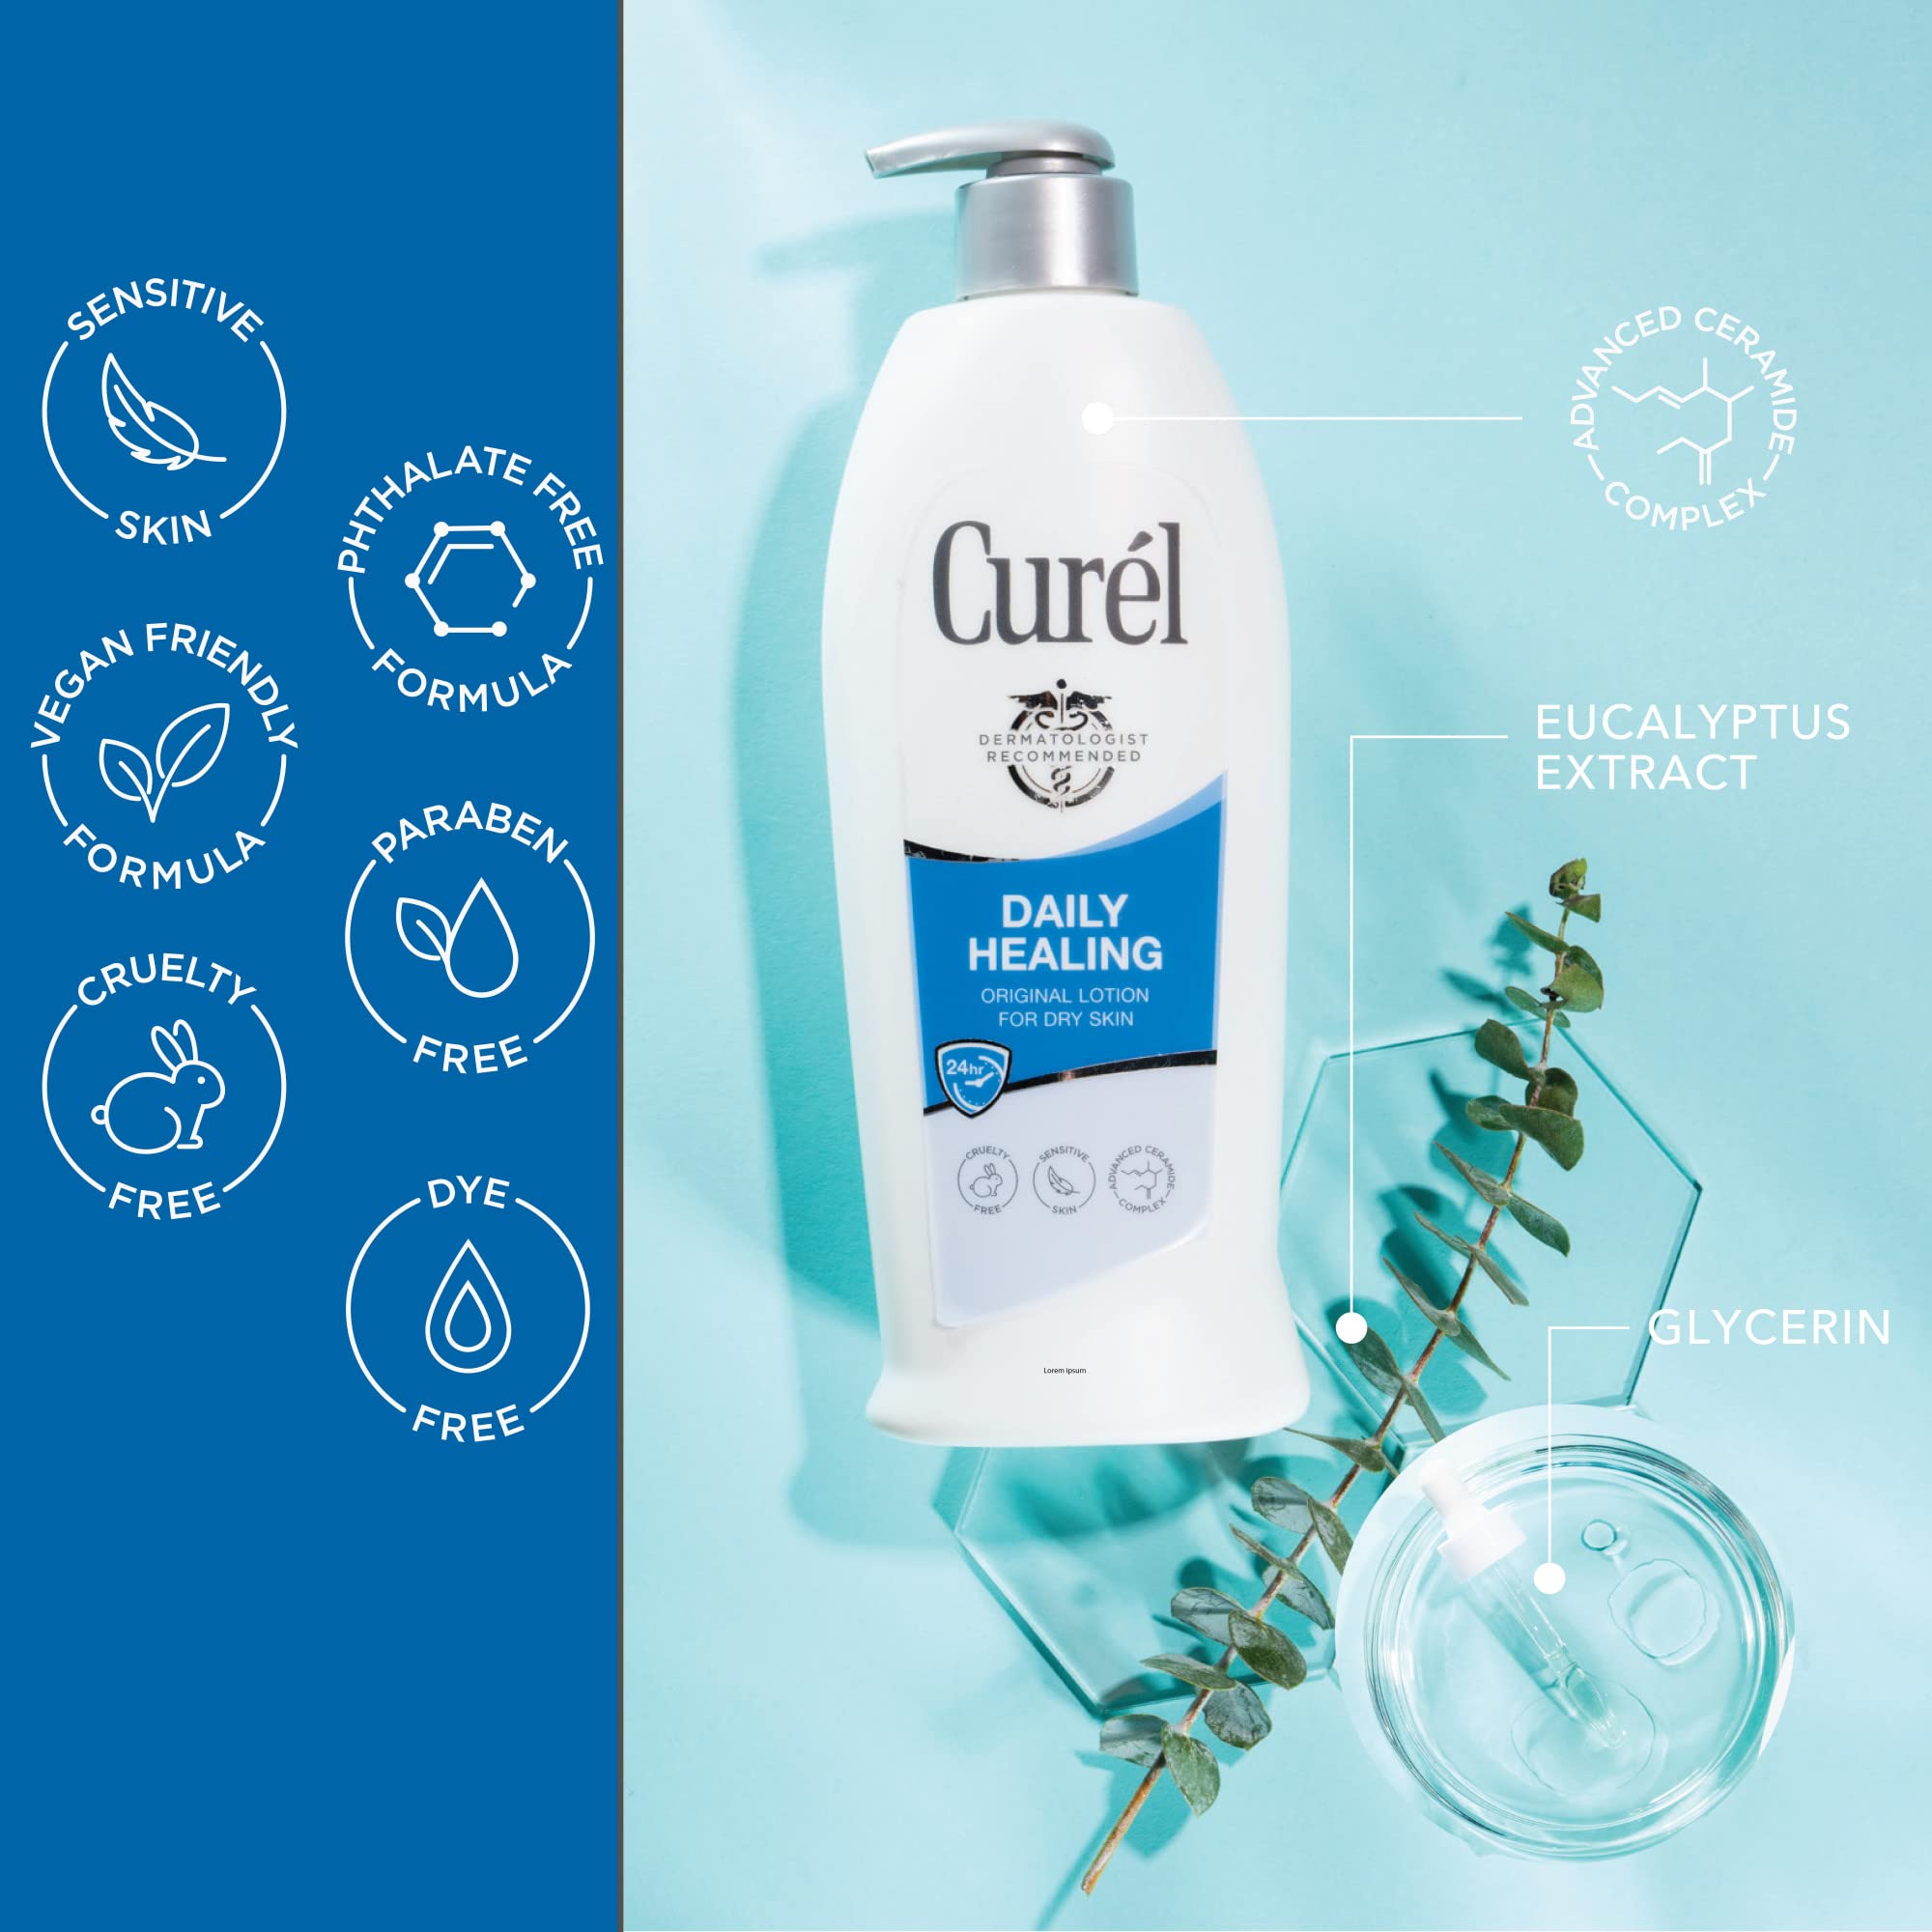 Curél Daily Healing Body Lotion for Dry Skin, Hand and Body Moisturizer Repairs Dry Skin and Retains Moisture, with Advanced Ceramides Complex, 20 Ounce